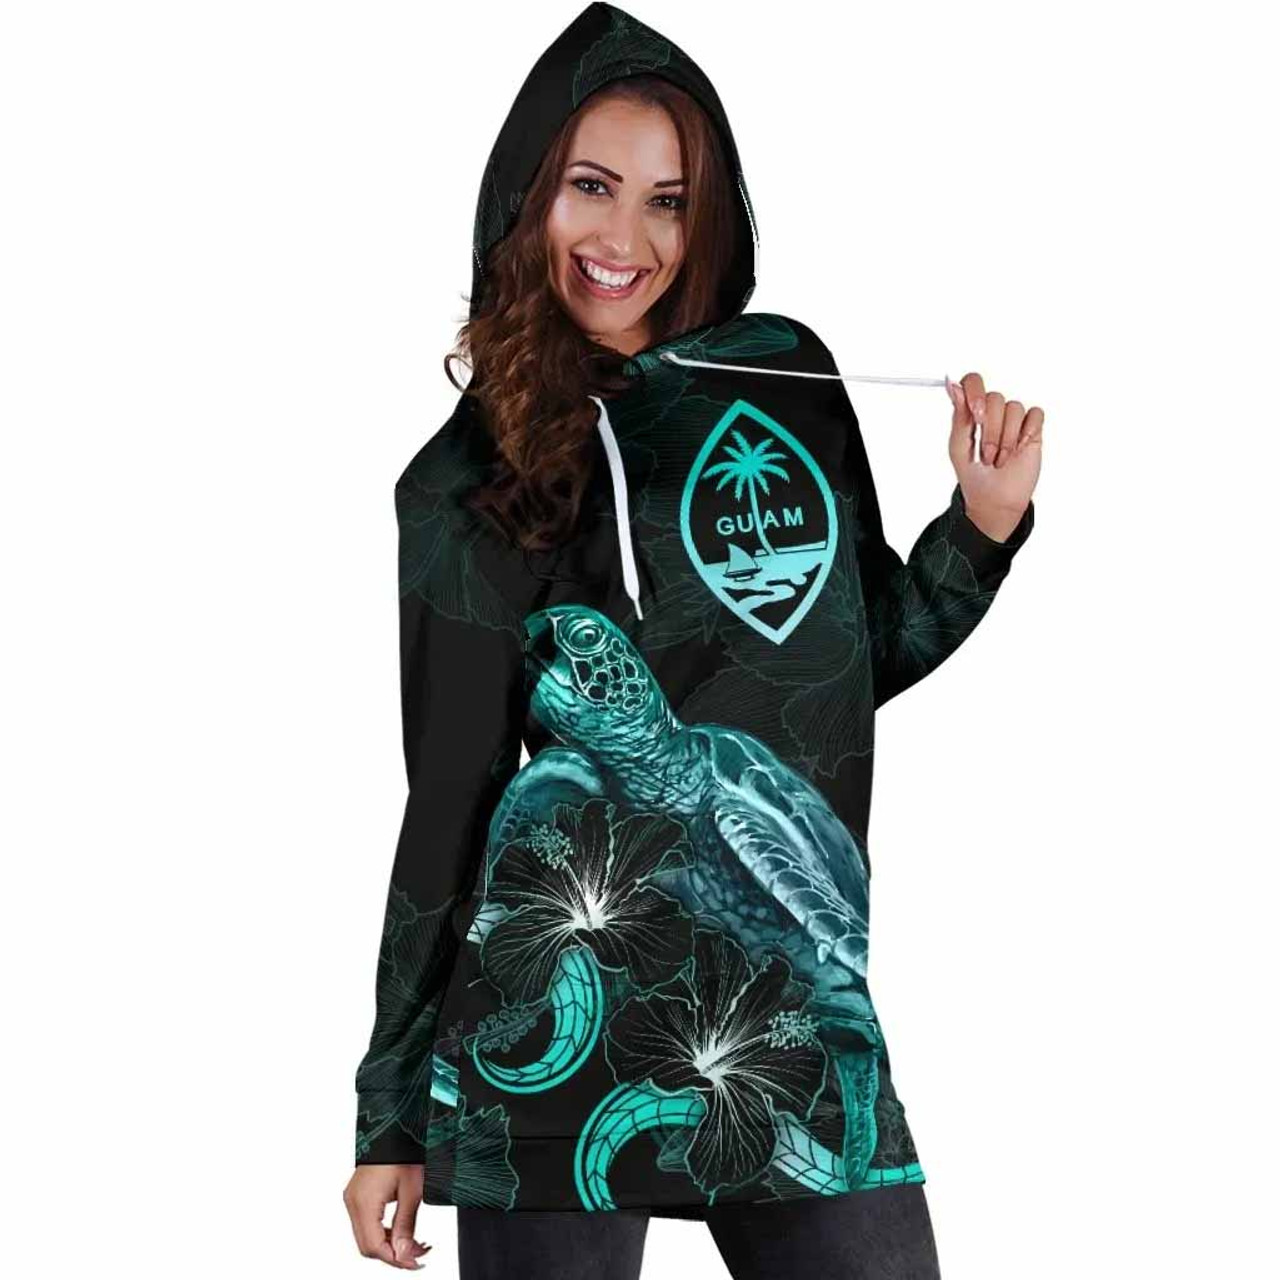 Guam Polynesian Hoodie Dress - Turtle With Blooming Hibiscus Turquoise 4